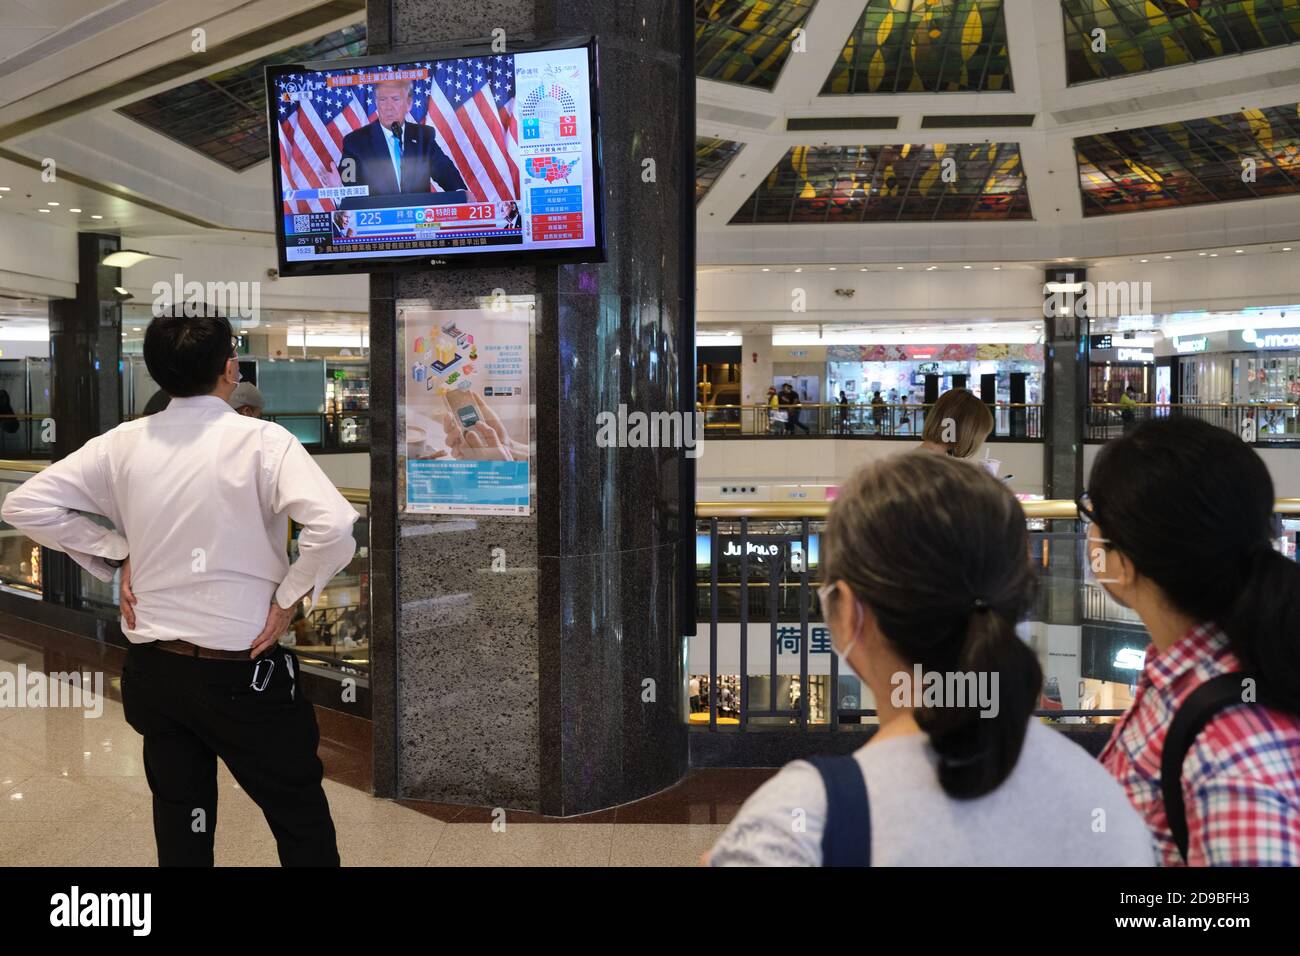 People watch live news report of the US Presidential elections at a shopping mall in Hong Kong as U.S.'s future policies on Hong Kong may be affected. Stock Photo